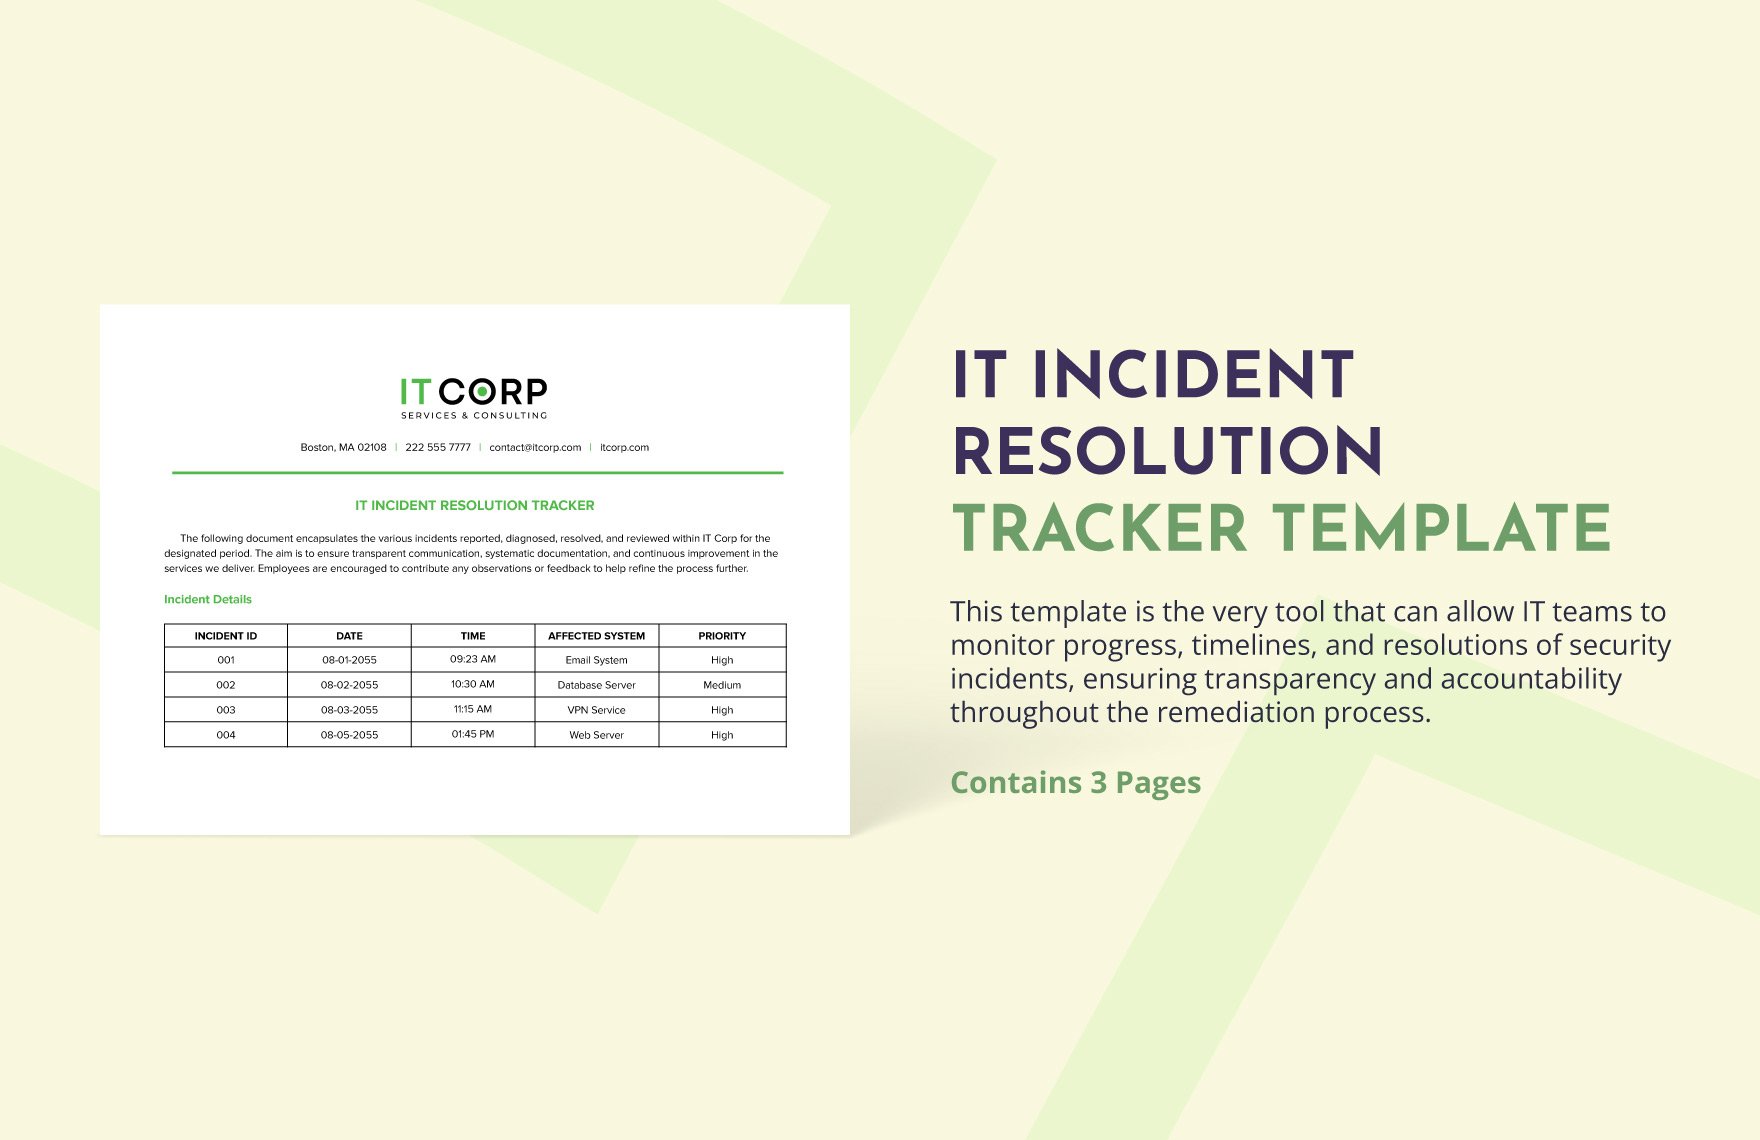 IT Incident Resolution Tracker Template